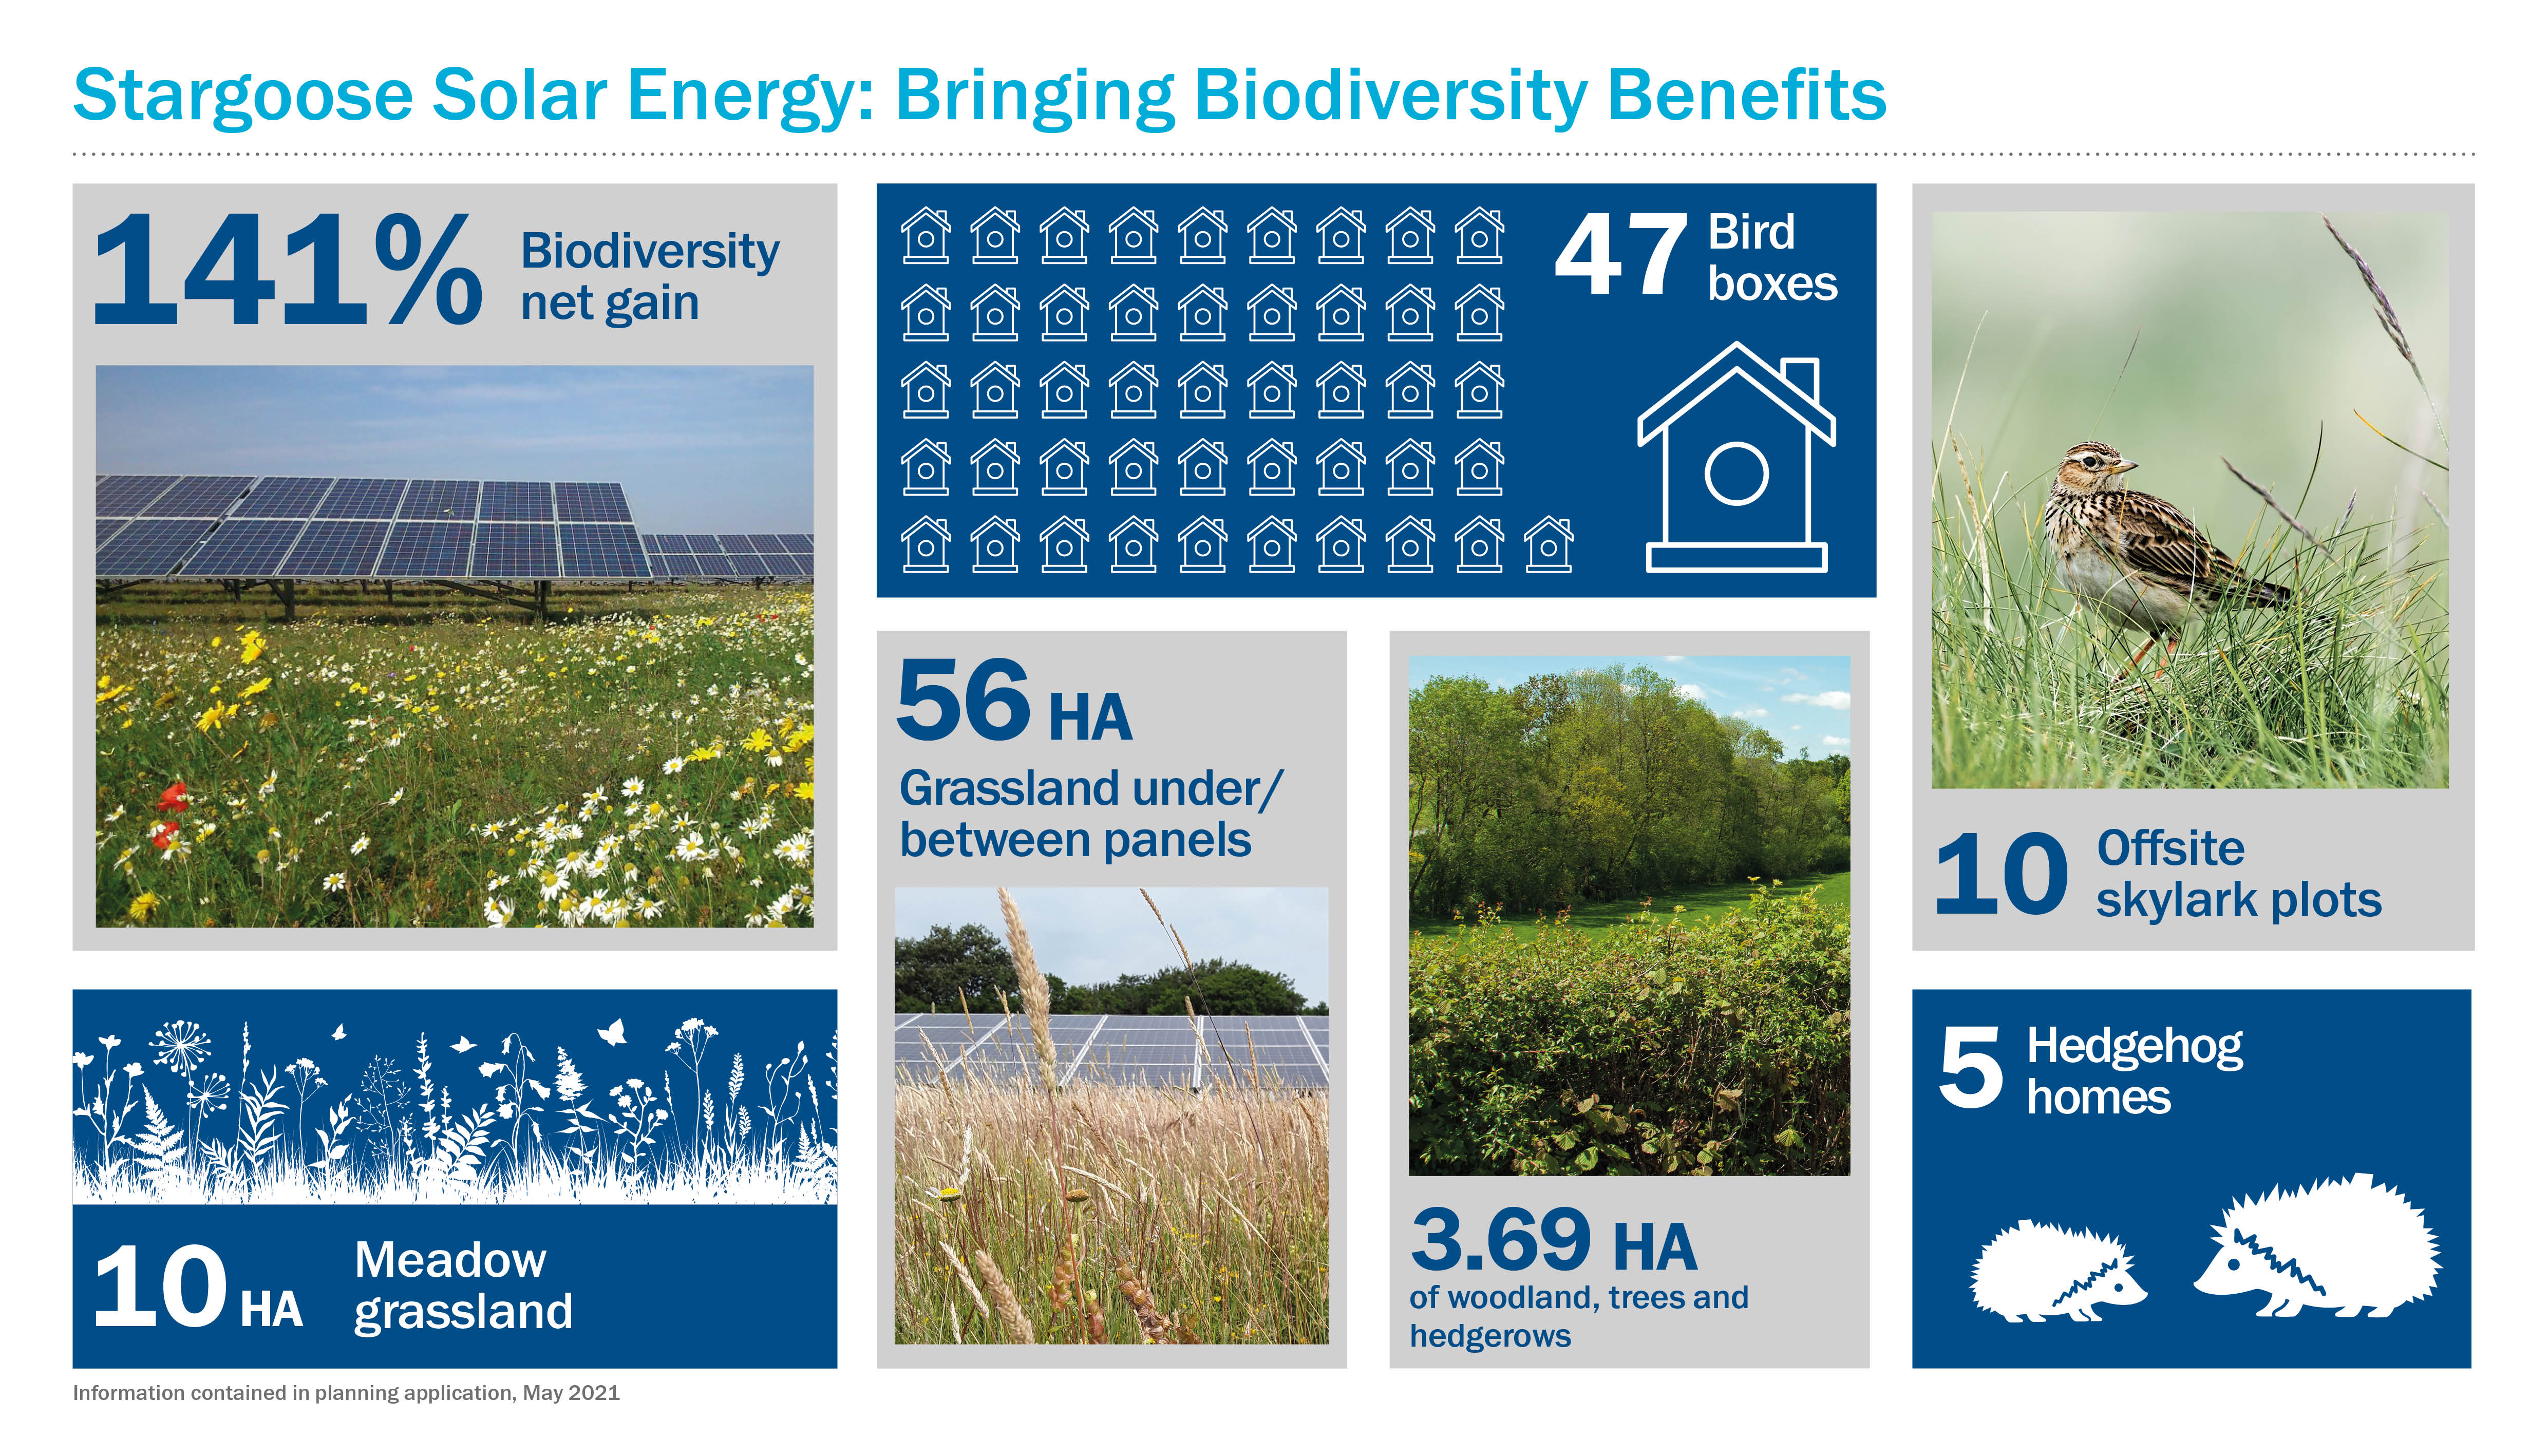 Graphic displaying key biodiversity enhancements of the project: 10HA of Meadow Grassland, 56HA of Grassland under or between panels, 3.69HA of woodlands, trees and hedgerows, 5 hedgehog homes, 47 birdboxes and 5 offsite Skylark polts